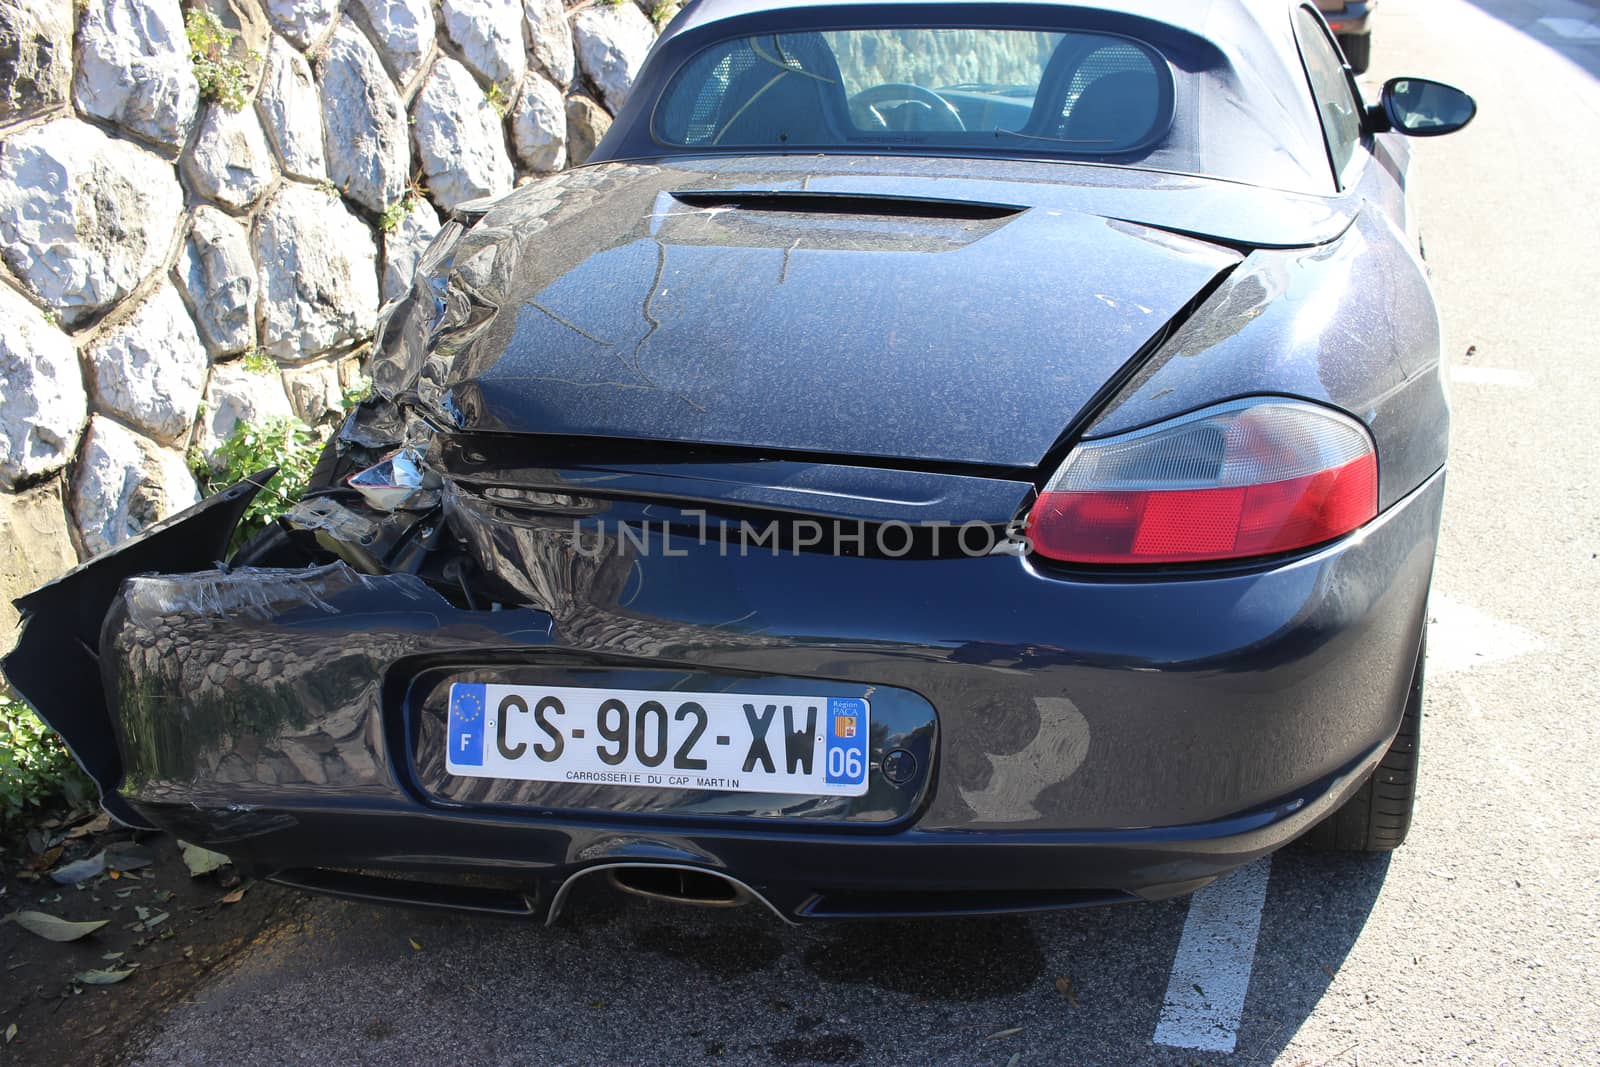 Roquebrune-Cap-Martin - March 1, 2016: Sport Car Crash Rear View. Luxurious Porsche 911 Roadster Parked in the Street after an Accident. South of France